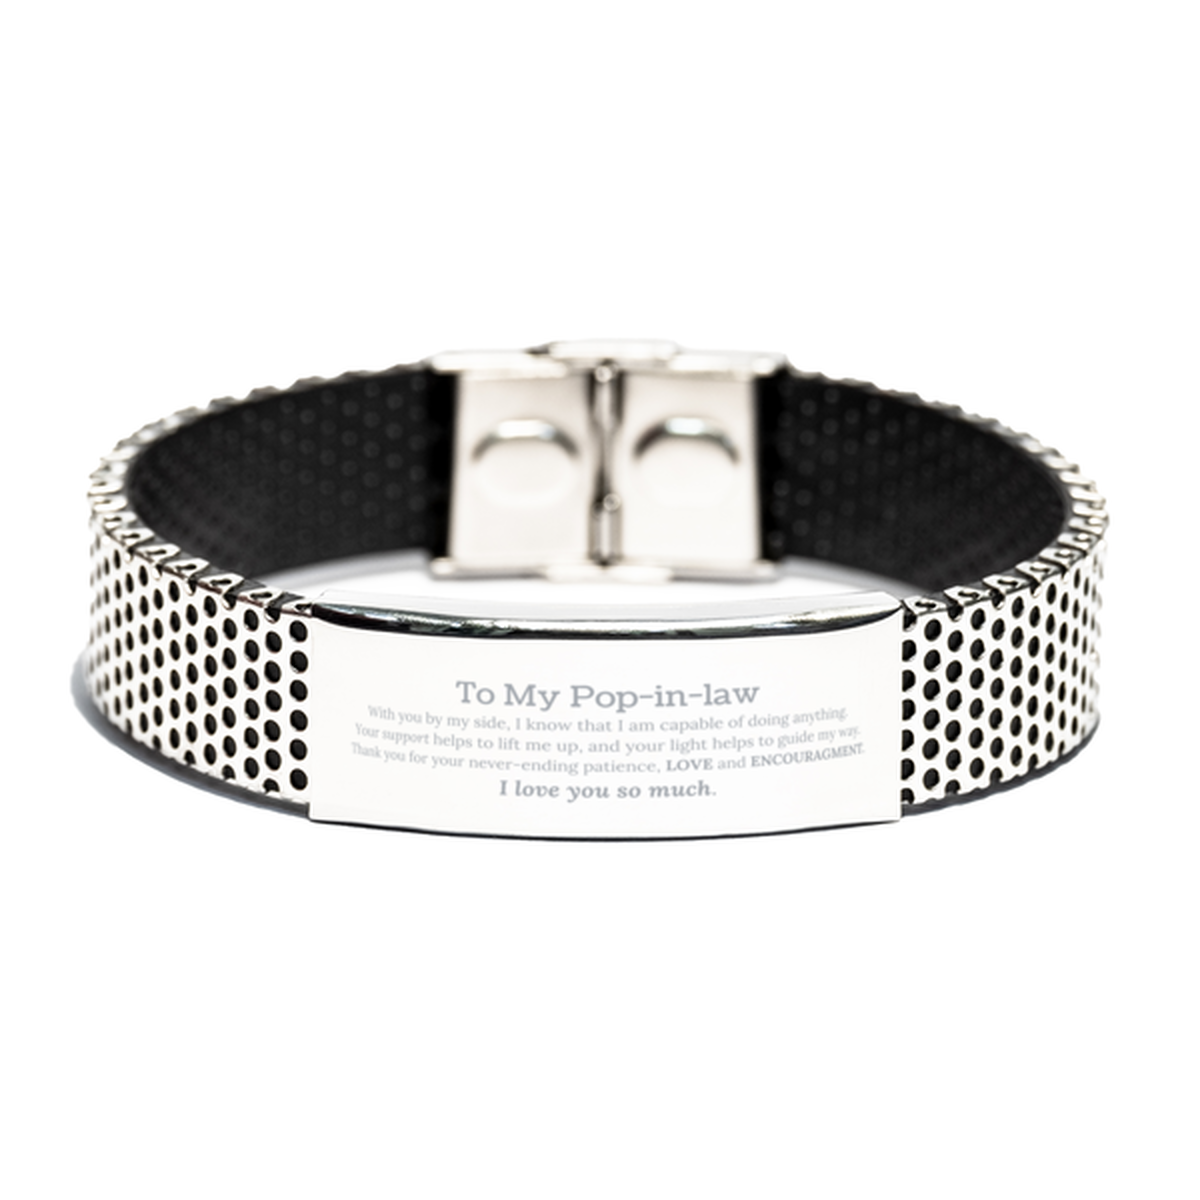 Appreciation Pop-in-law Stainless Steel Bracelet Gifts, To My Pop-in-law Birthday Christmas Wedding Keepsake Gifts for Pop-in-law With you by my side, I know that I am capable of doing anything. I love you so much